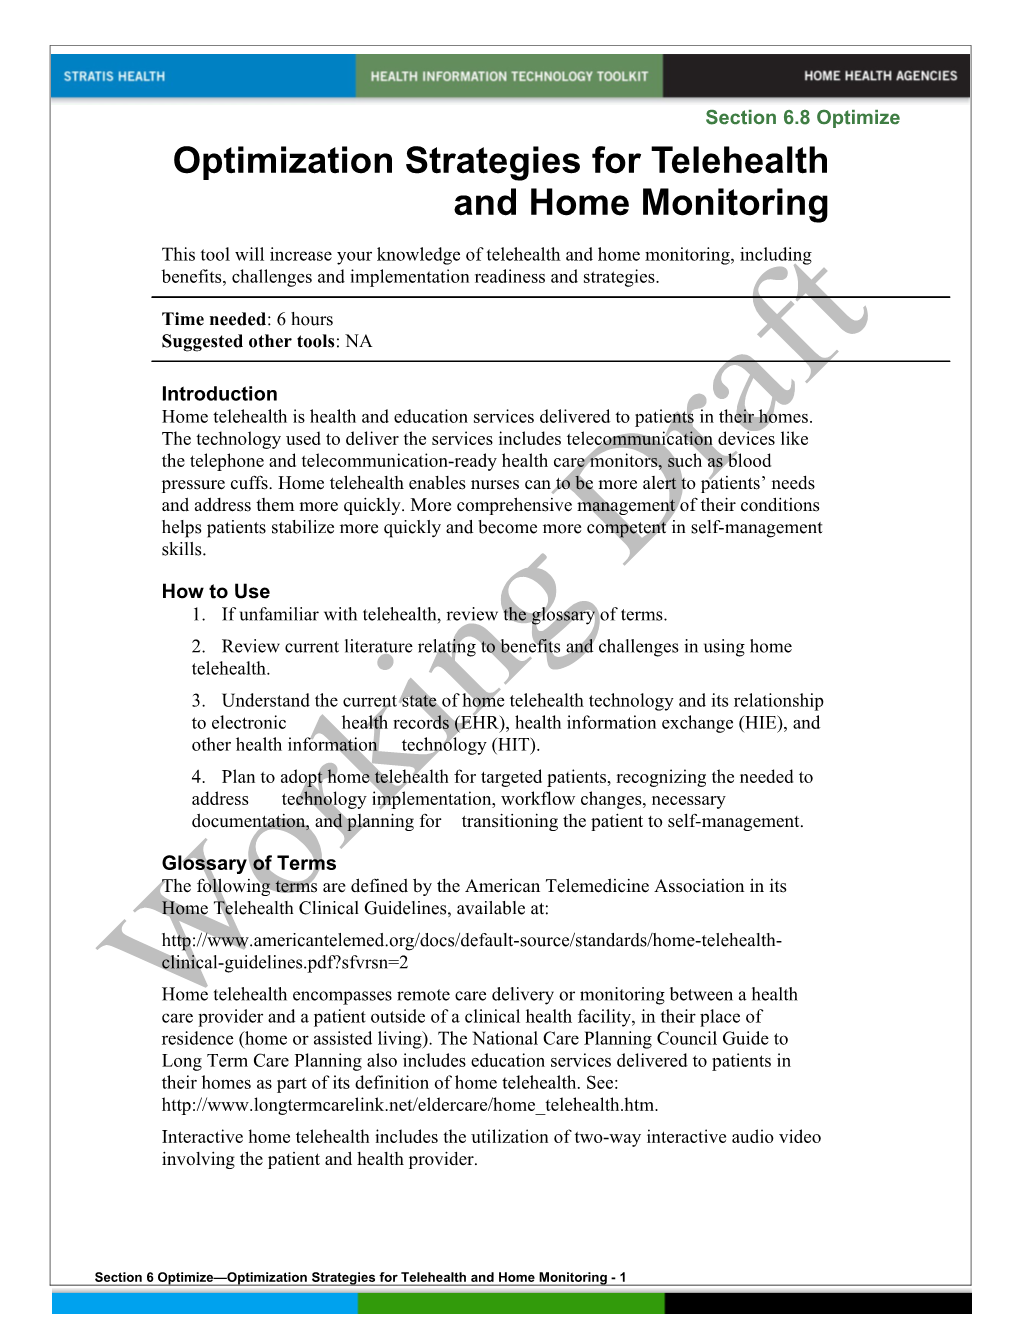 6 Optimization Strategies for Telehealth and Home Monitoring